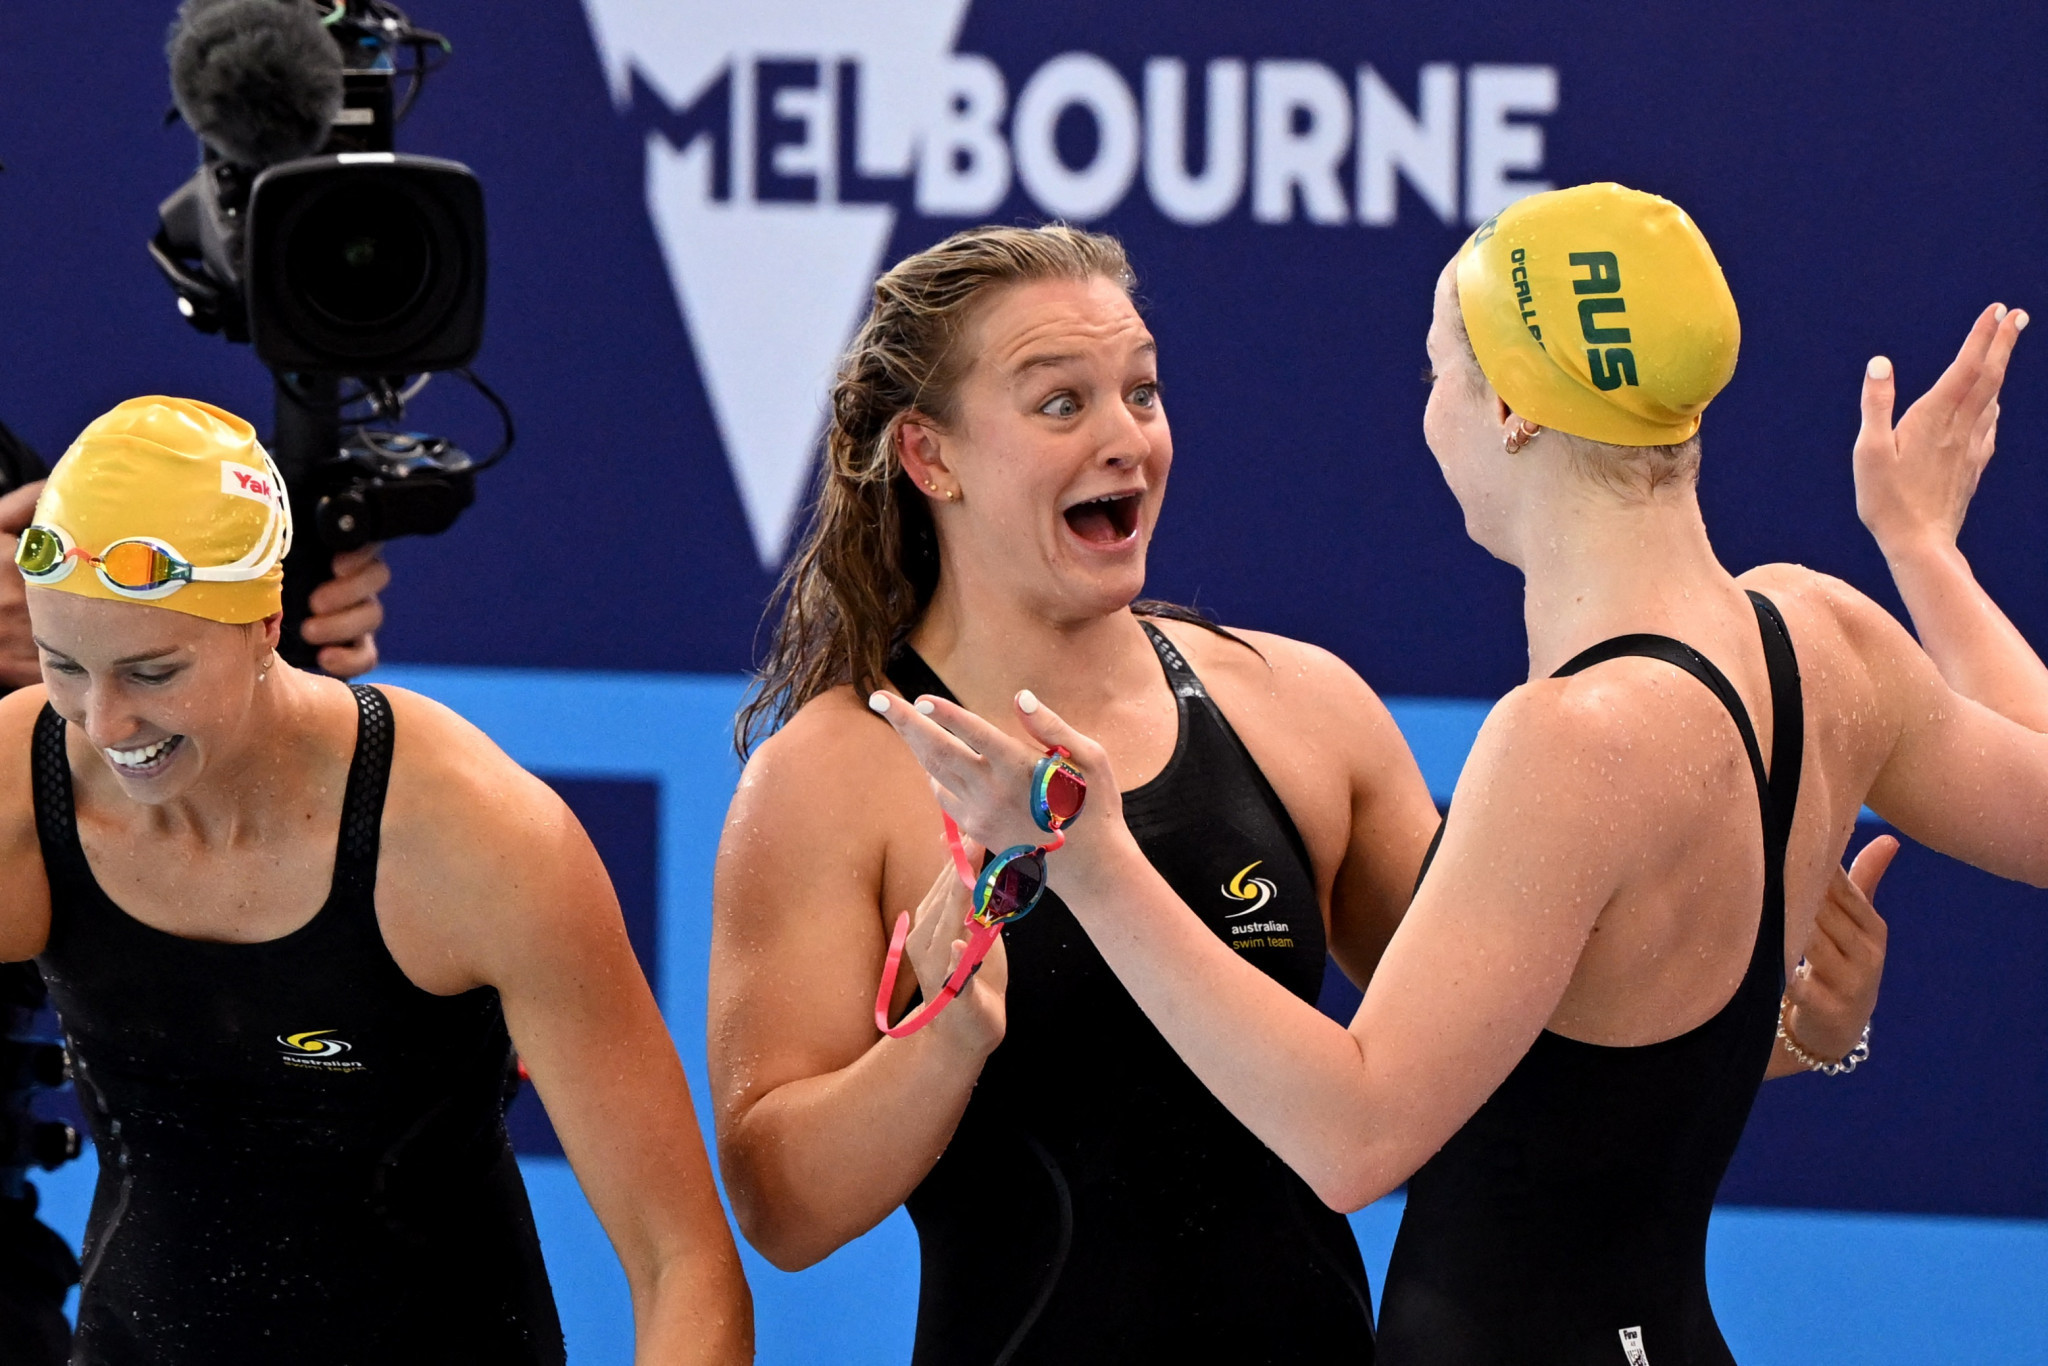 Chelsea Hodges is all smiles after helping Australia set a world record in the women's 4x50m medley relay to win gold ©Getty Images